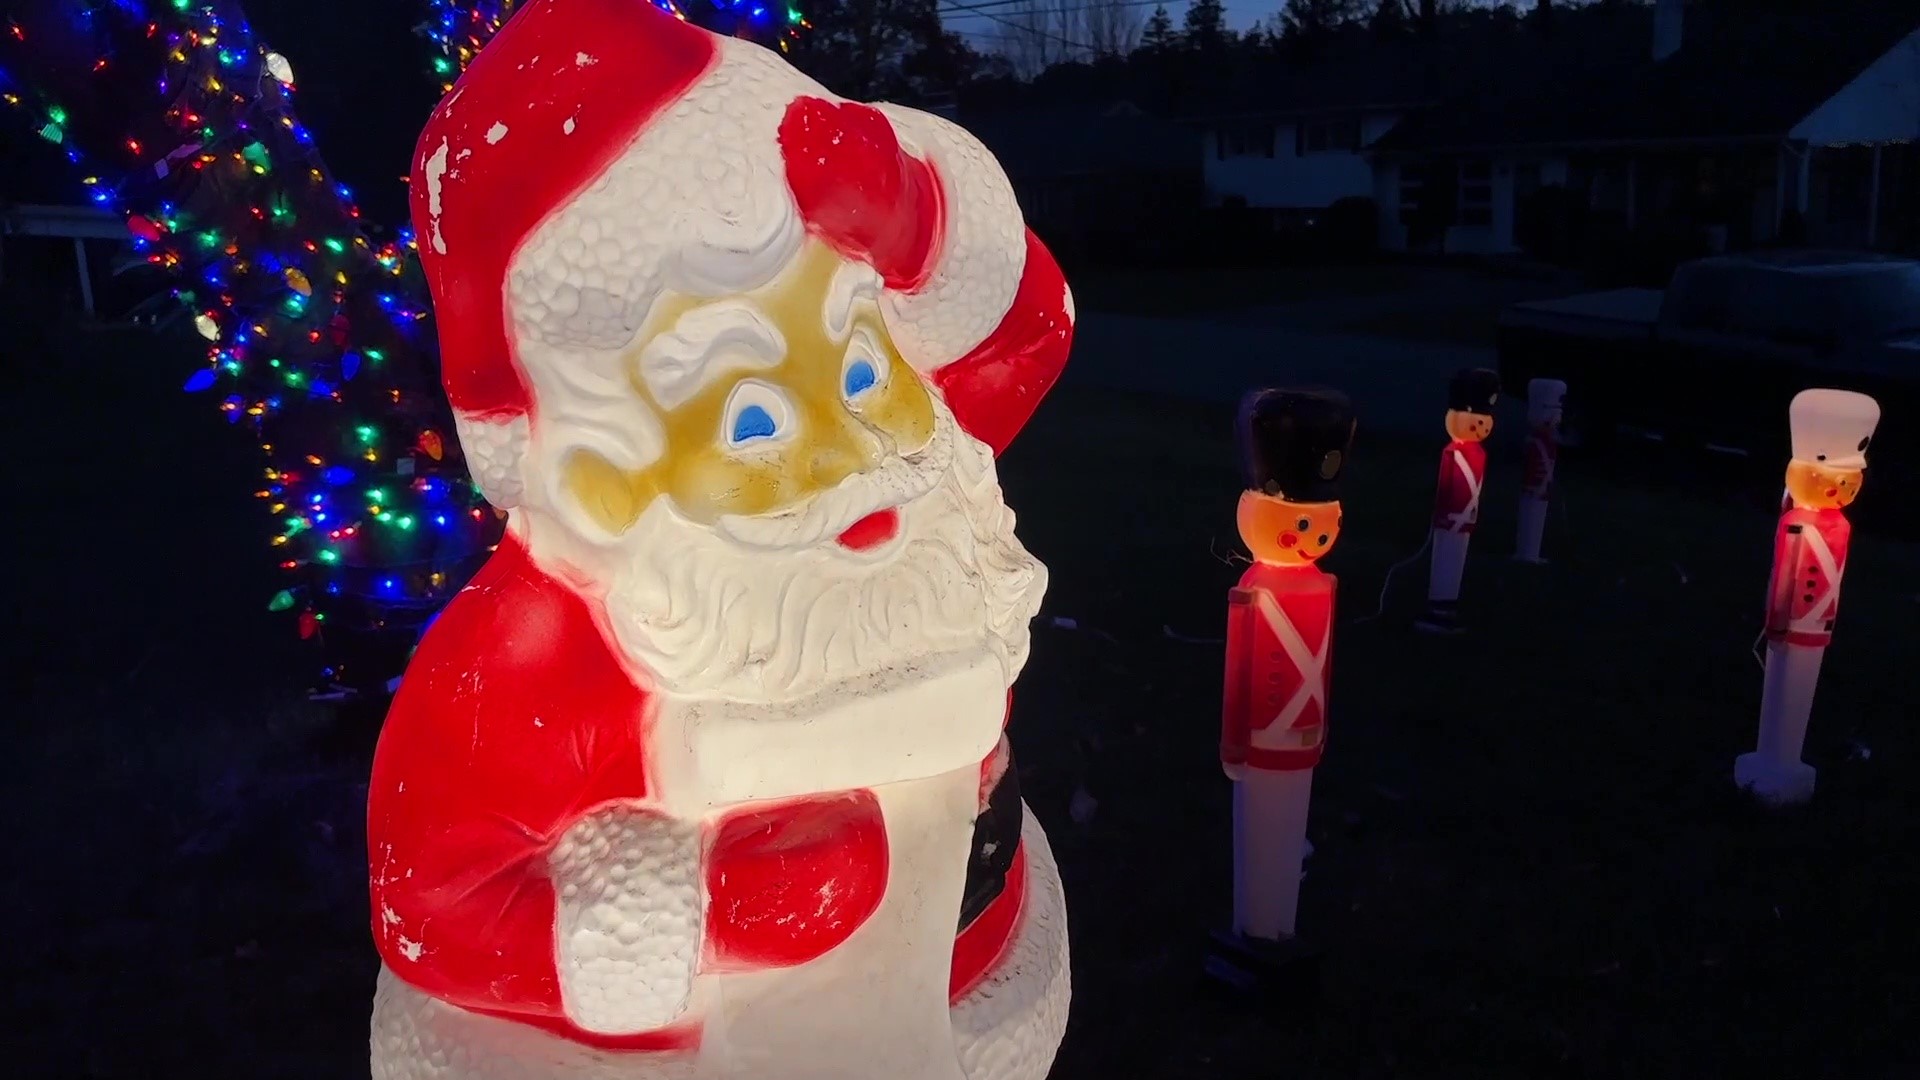 The holidays are in full swing for a family in Luzerne County as they've been preparing for months to light up the Back Mountain with their home holiday display.